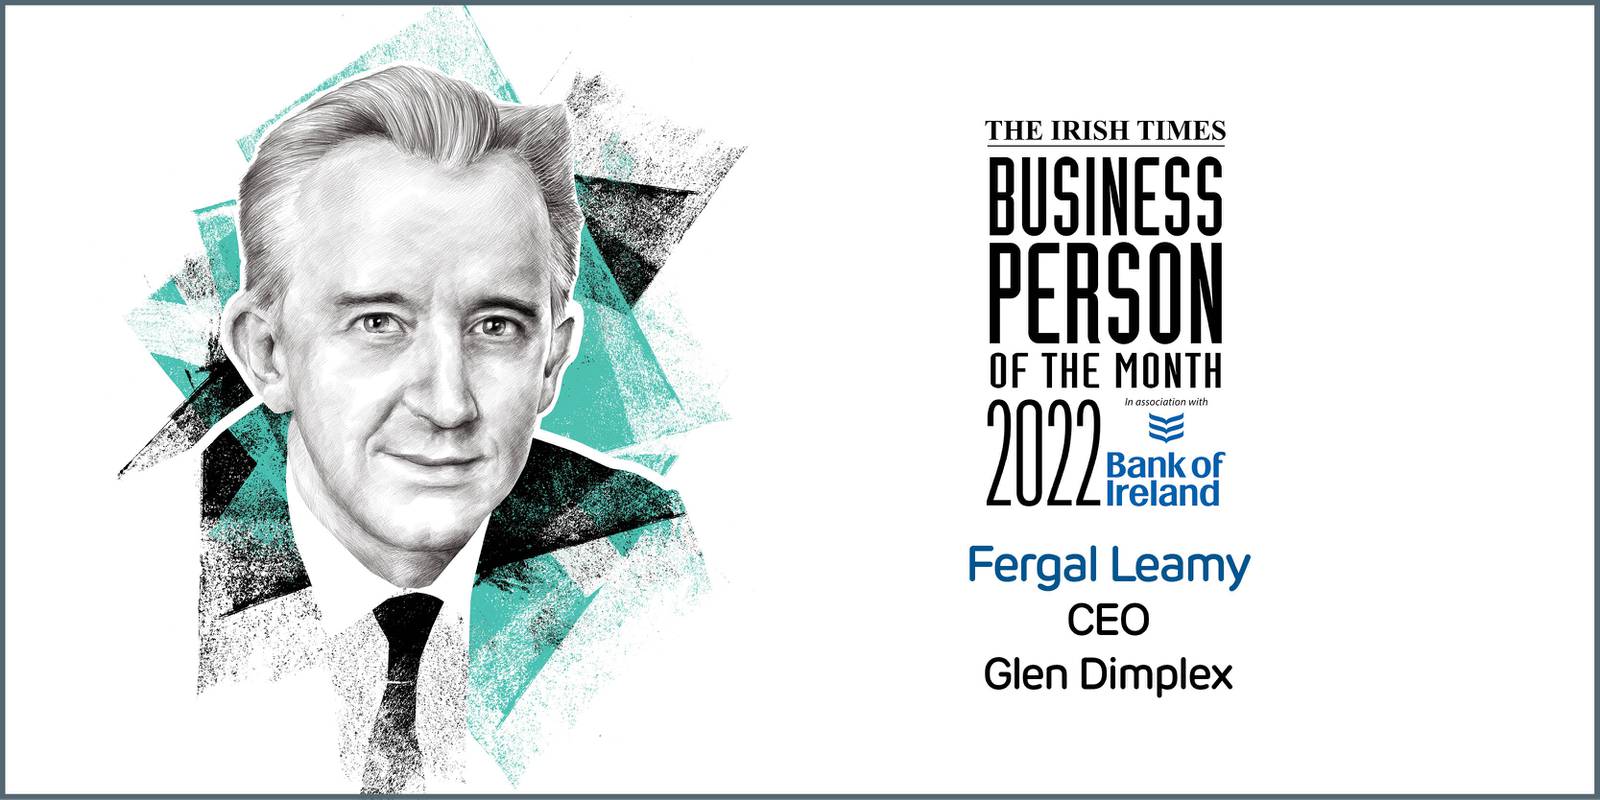 Fergal Leamy, Business Person of the Month June 2022